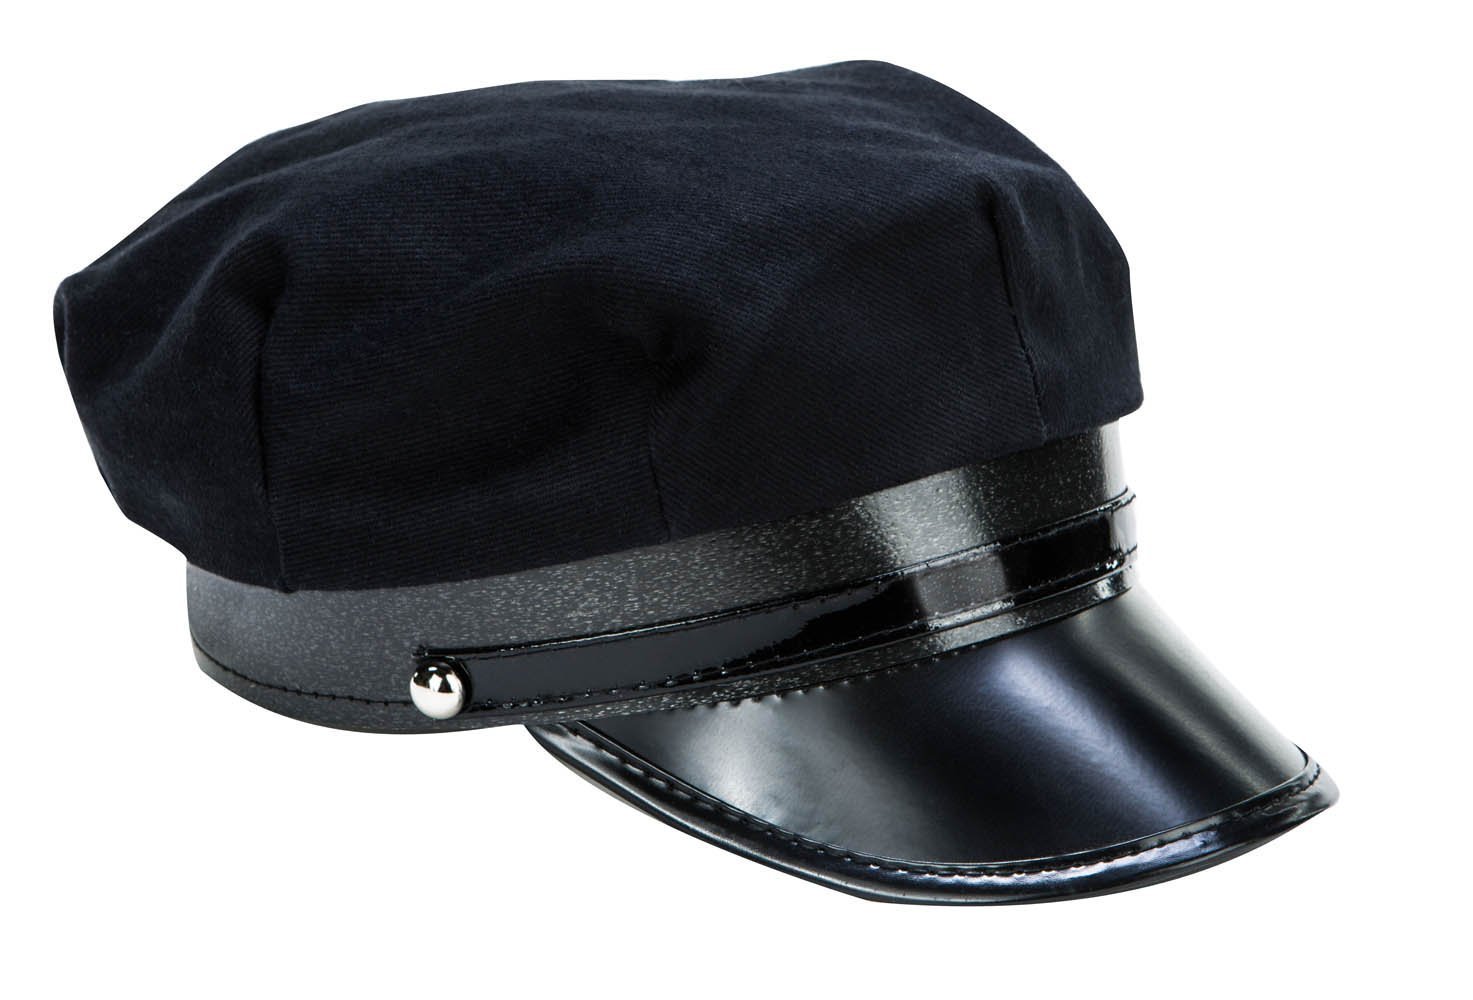 Black Chauffeur Limo Driver Costume Hat and 50 similar items